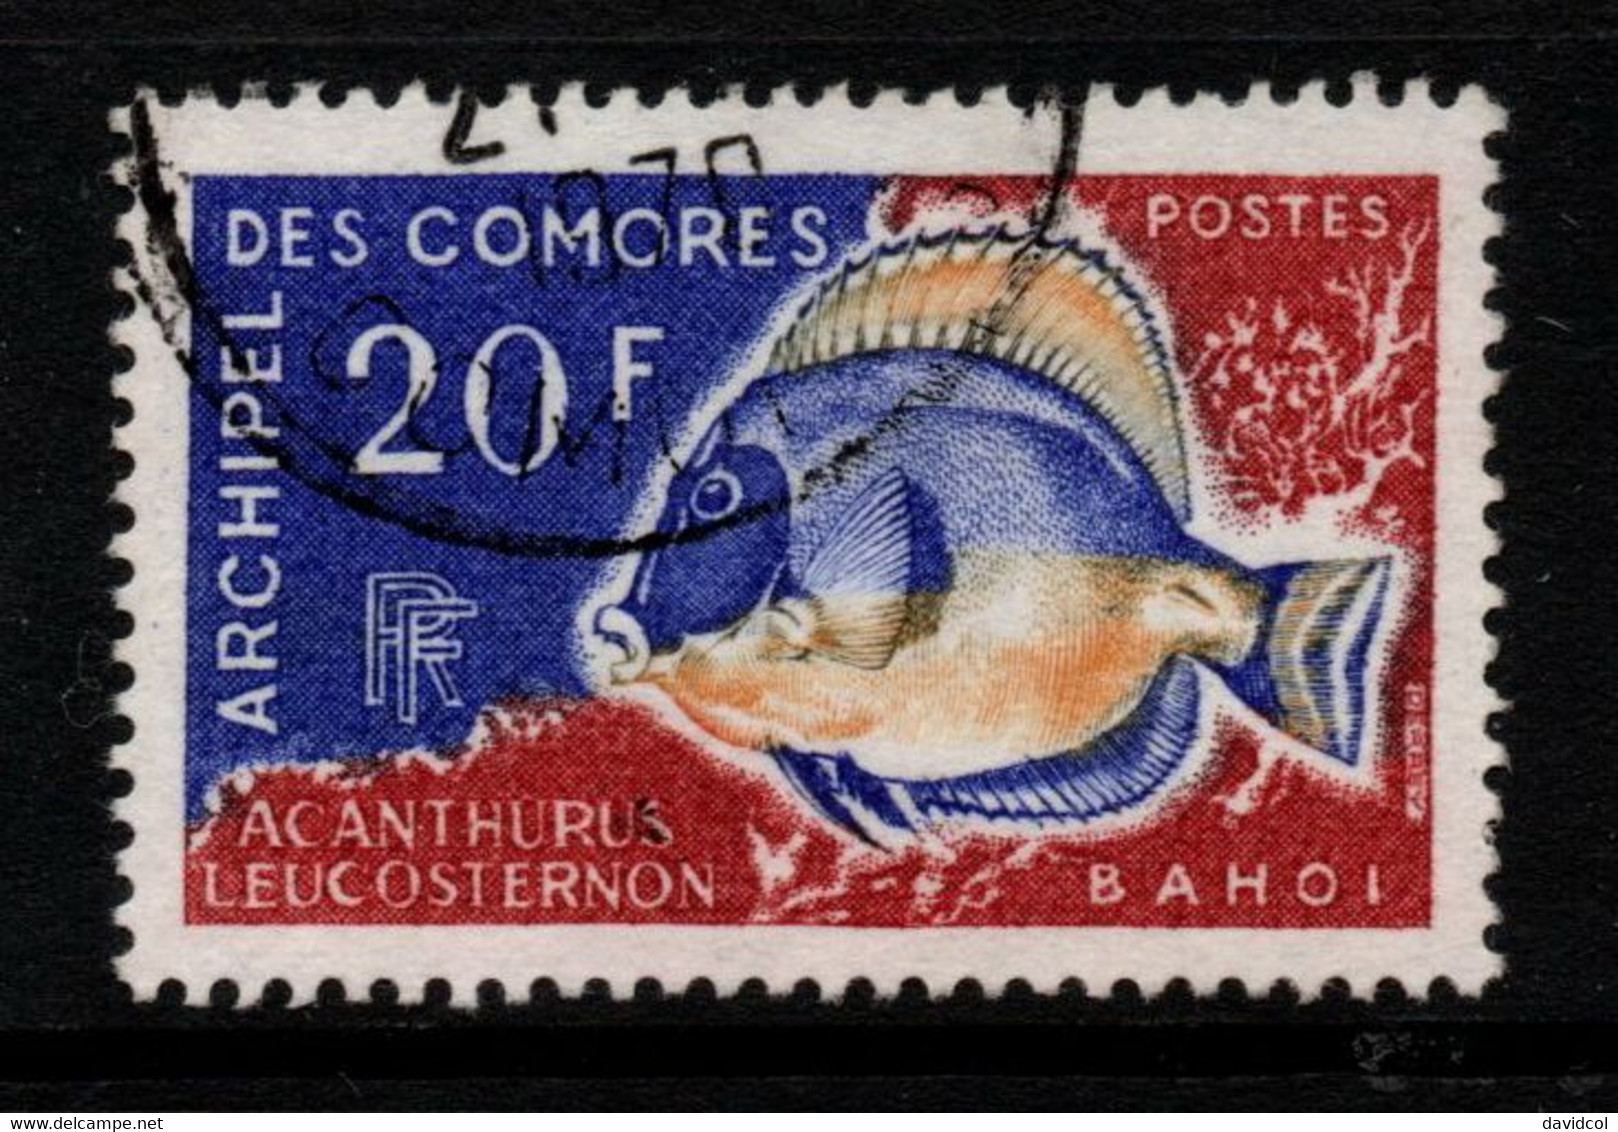 2069A- COMORO ISLANDS - 1968 - SC#: 74 - USED - SURGEON FISH - Used Stamps